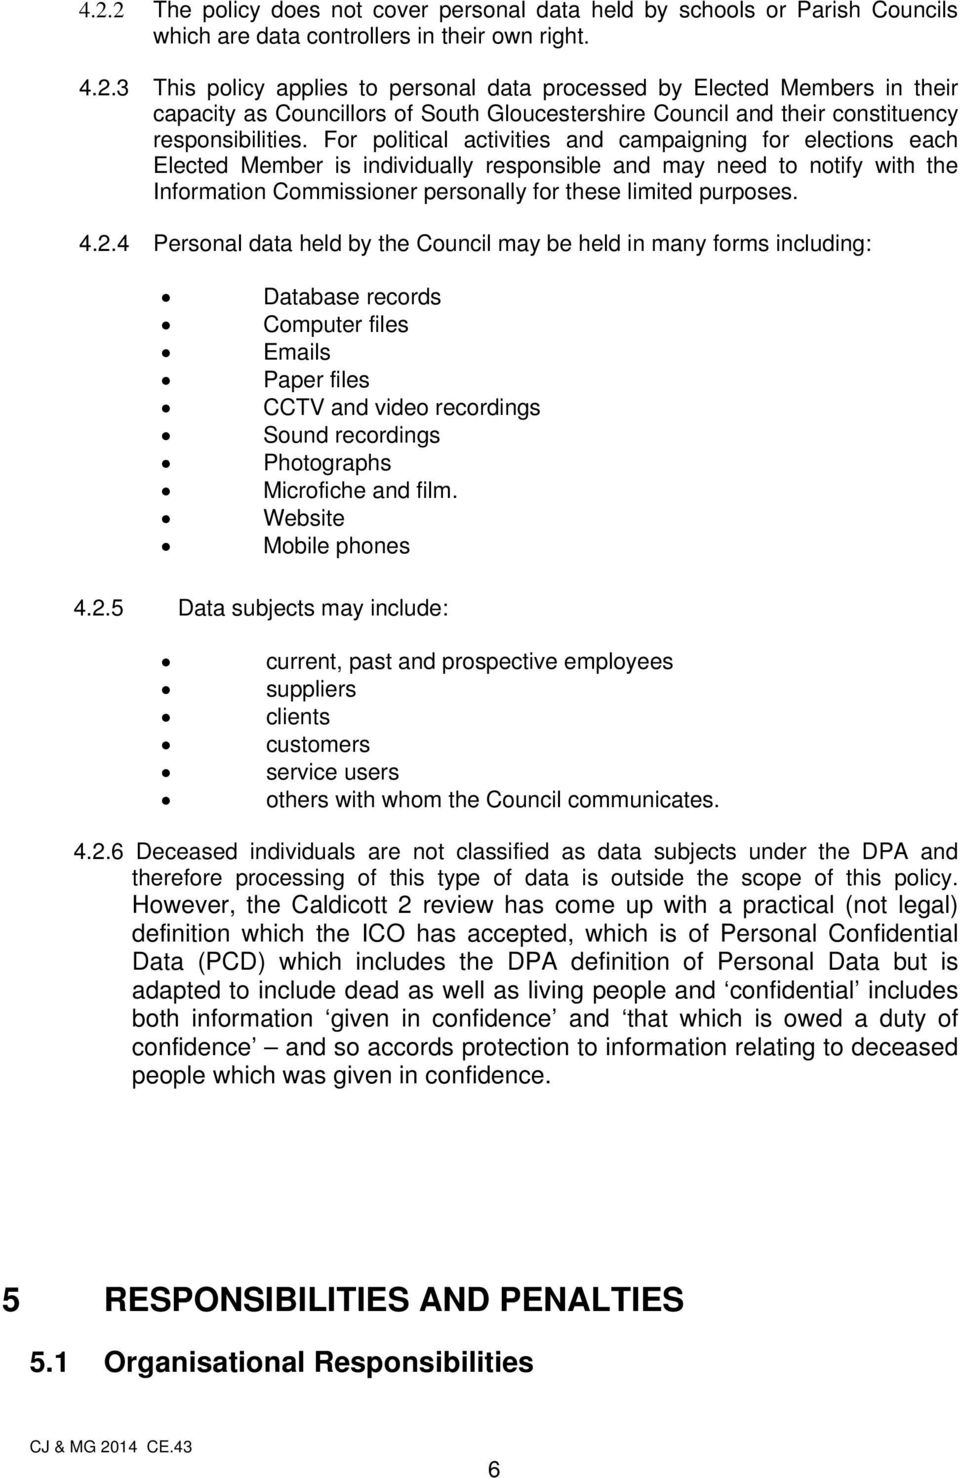 4.2.4 Personal data held by the Council may be held in many forms including: Database records Computer files Emails Paper files CCTV and video recordings Sound recordings Photographs Microfiche and